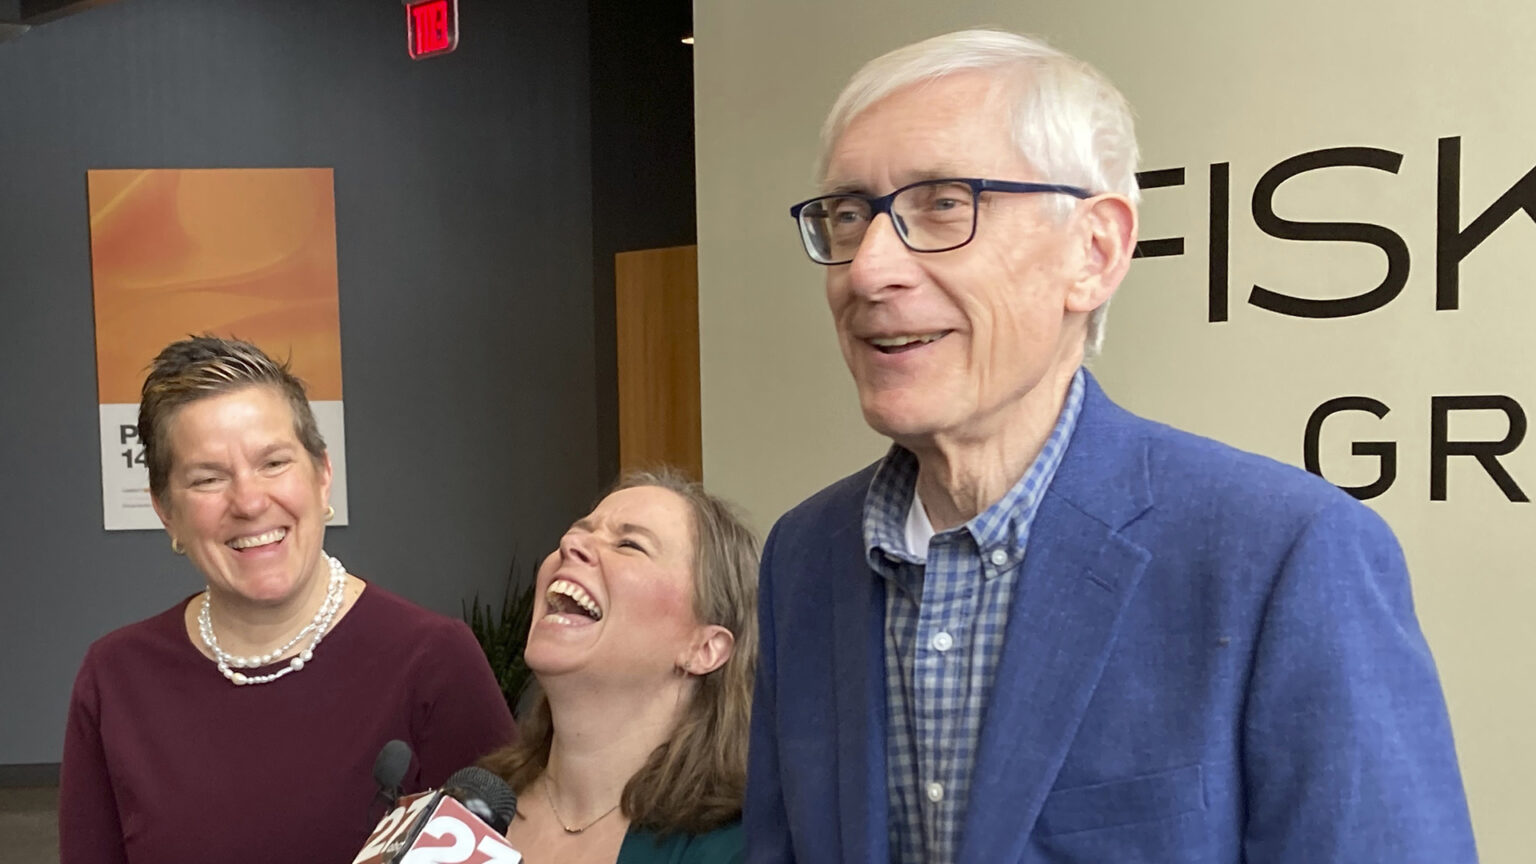 Missy Hughes and Tony Evers stand on other side of Sara Rodriguez, who is laughing while speaking into a microphone, in a room with two walls painted different colors.